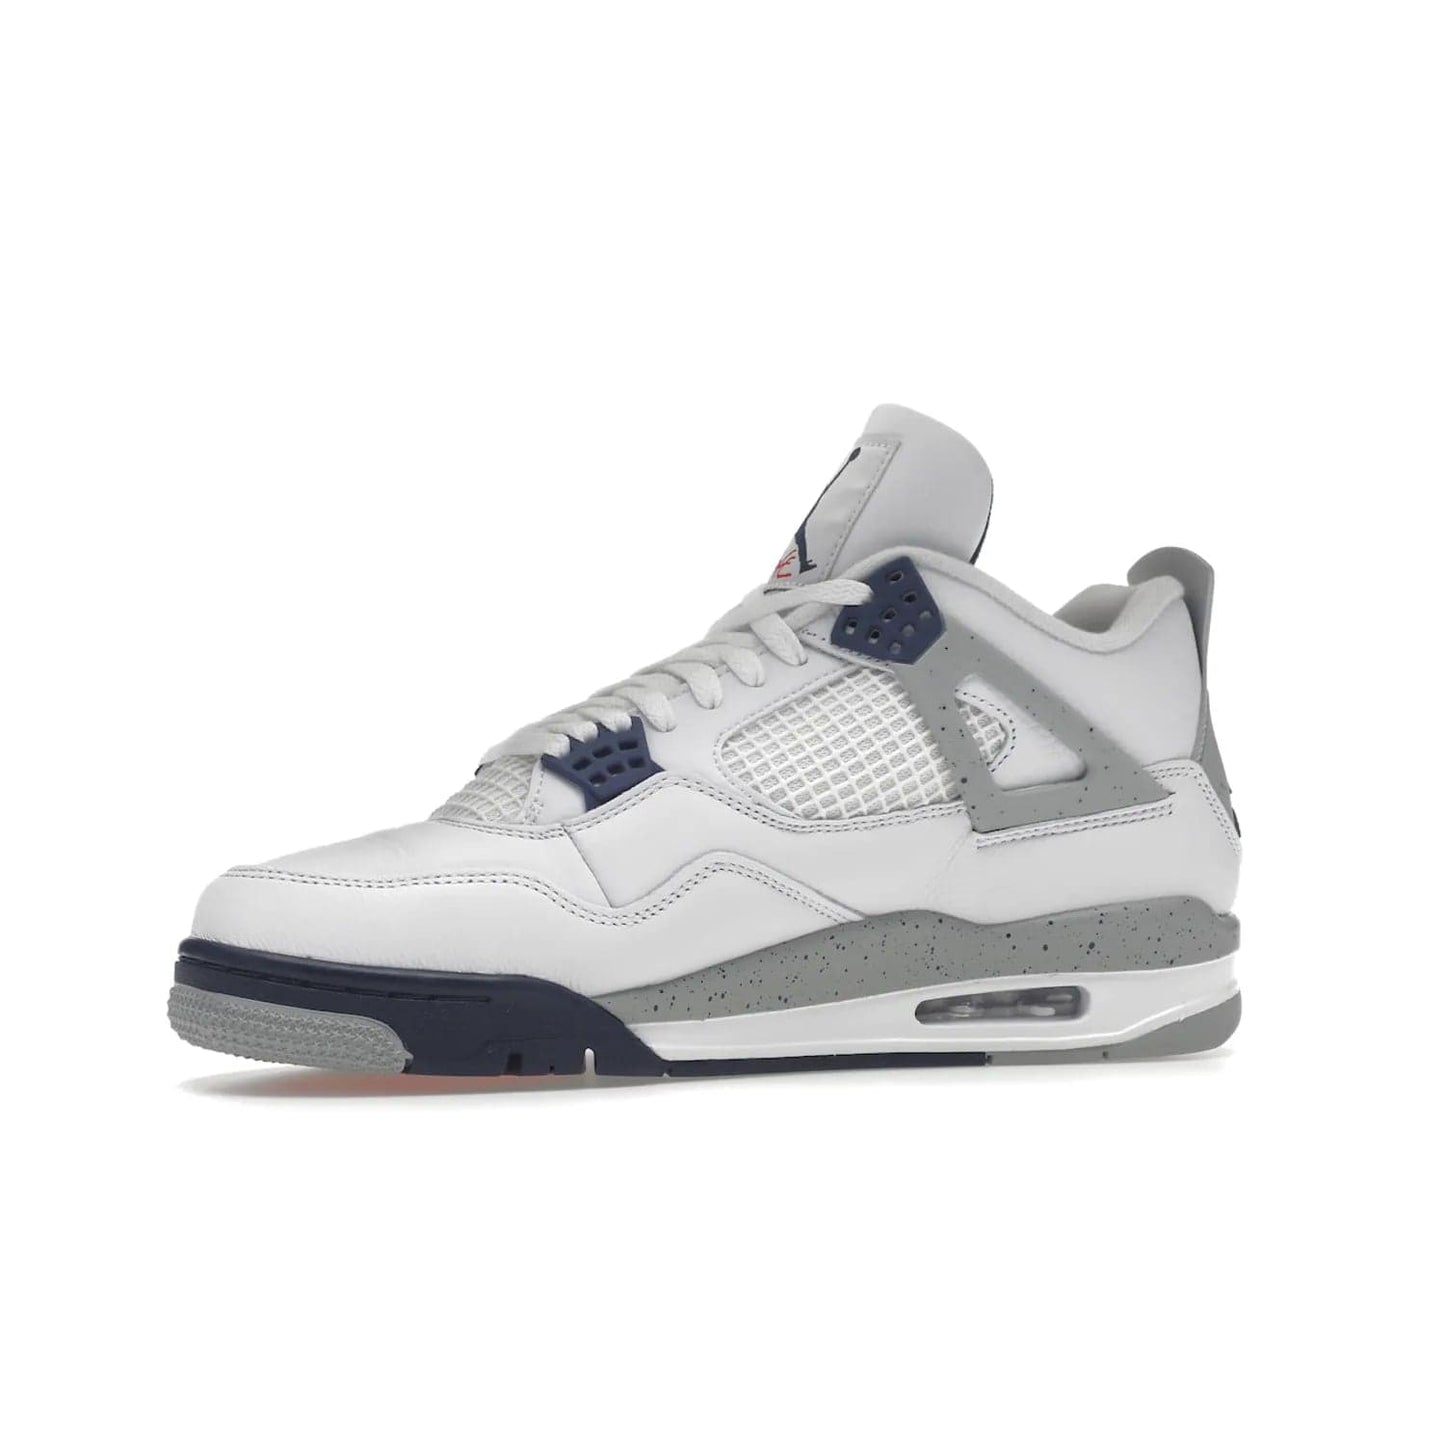 Jordan 4 Retro Midnight Navy - Image 17 - Only at www.BallersClubKickz.com - Shop the Air Jordan Retro 4 White Midnight Navy. Stand out with a classic white leather upper, black support wings, midnight navy eyelets, and Crimson Jumpman tongue tag. Unbeatable comfort with two-tone polyurethane midsole with encapsulated Air technology. Get yours before October 29th, 2022.